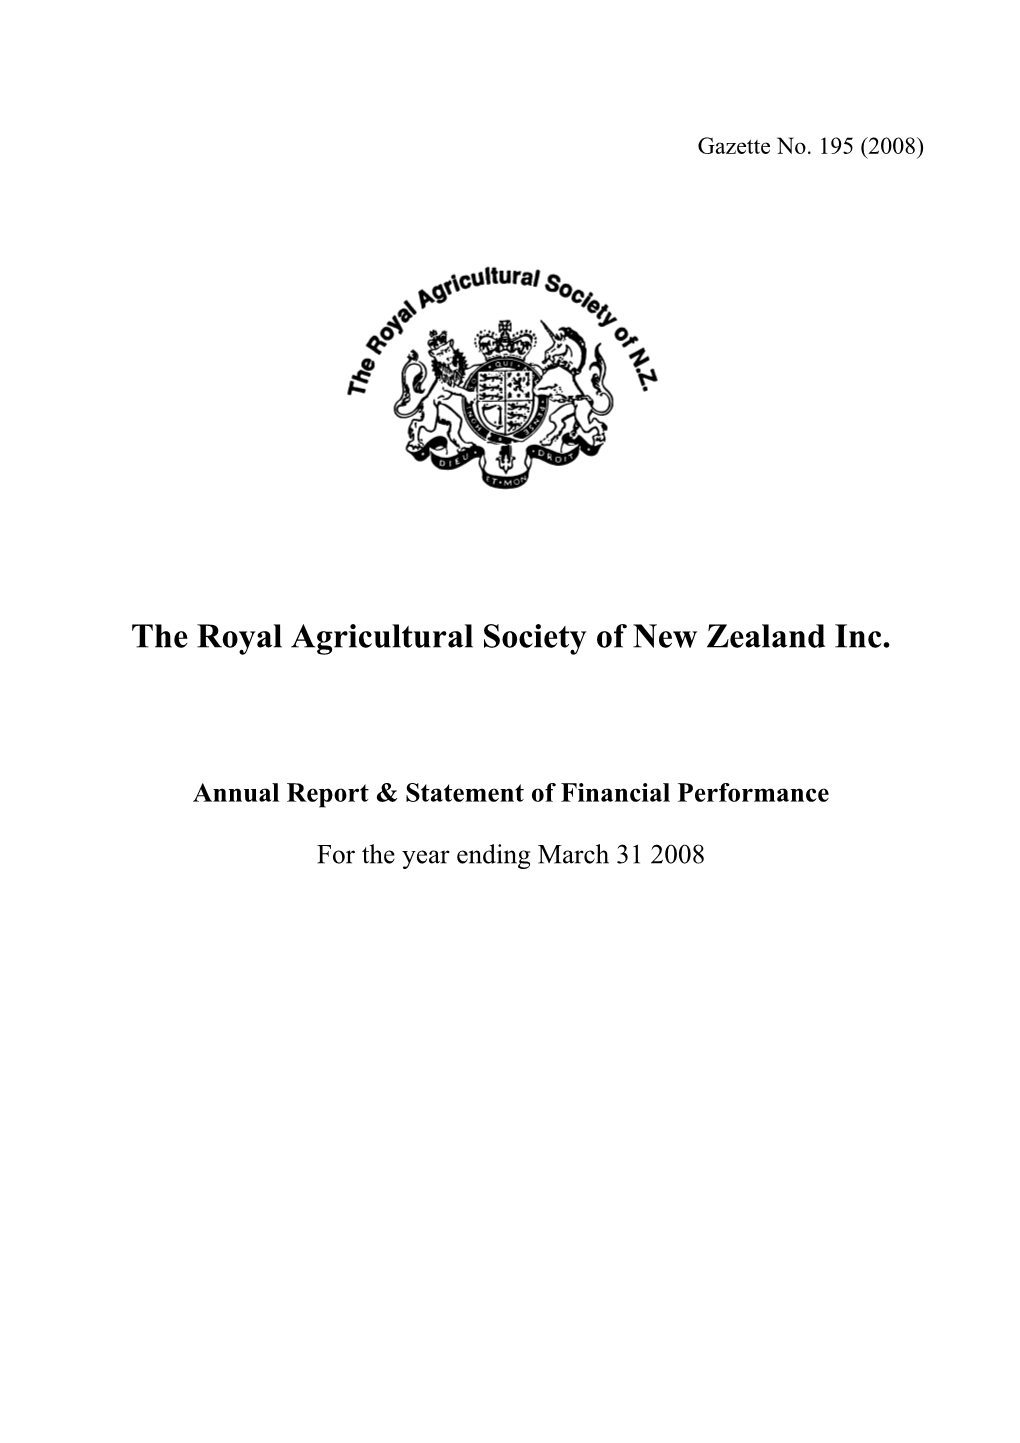 The Royal Agricultural Societyof New Zealand Inc